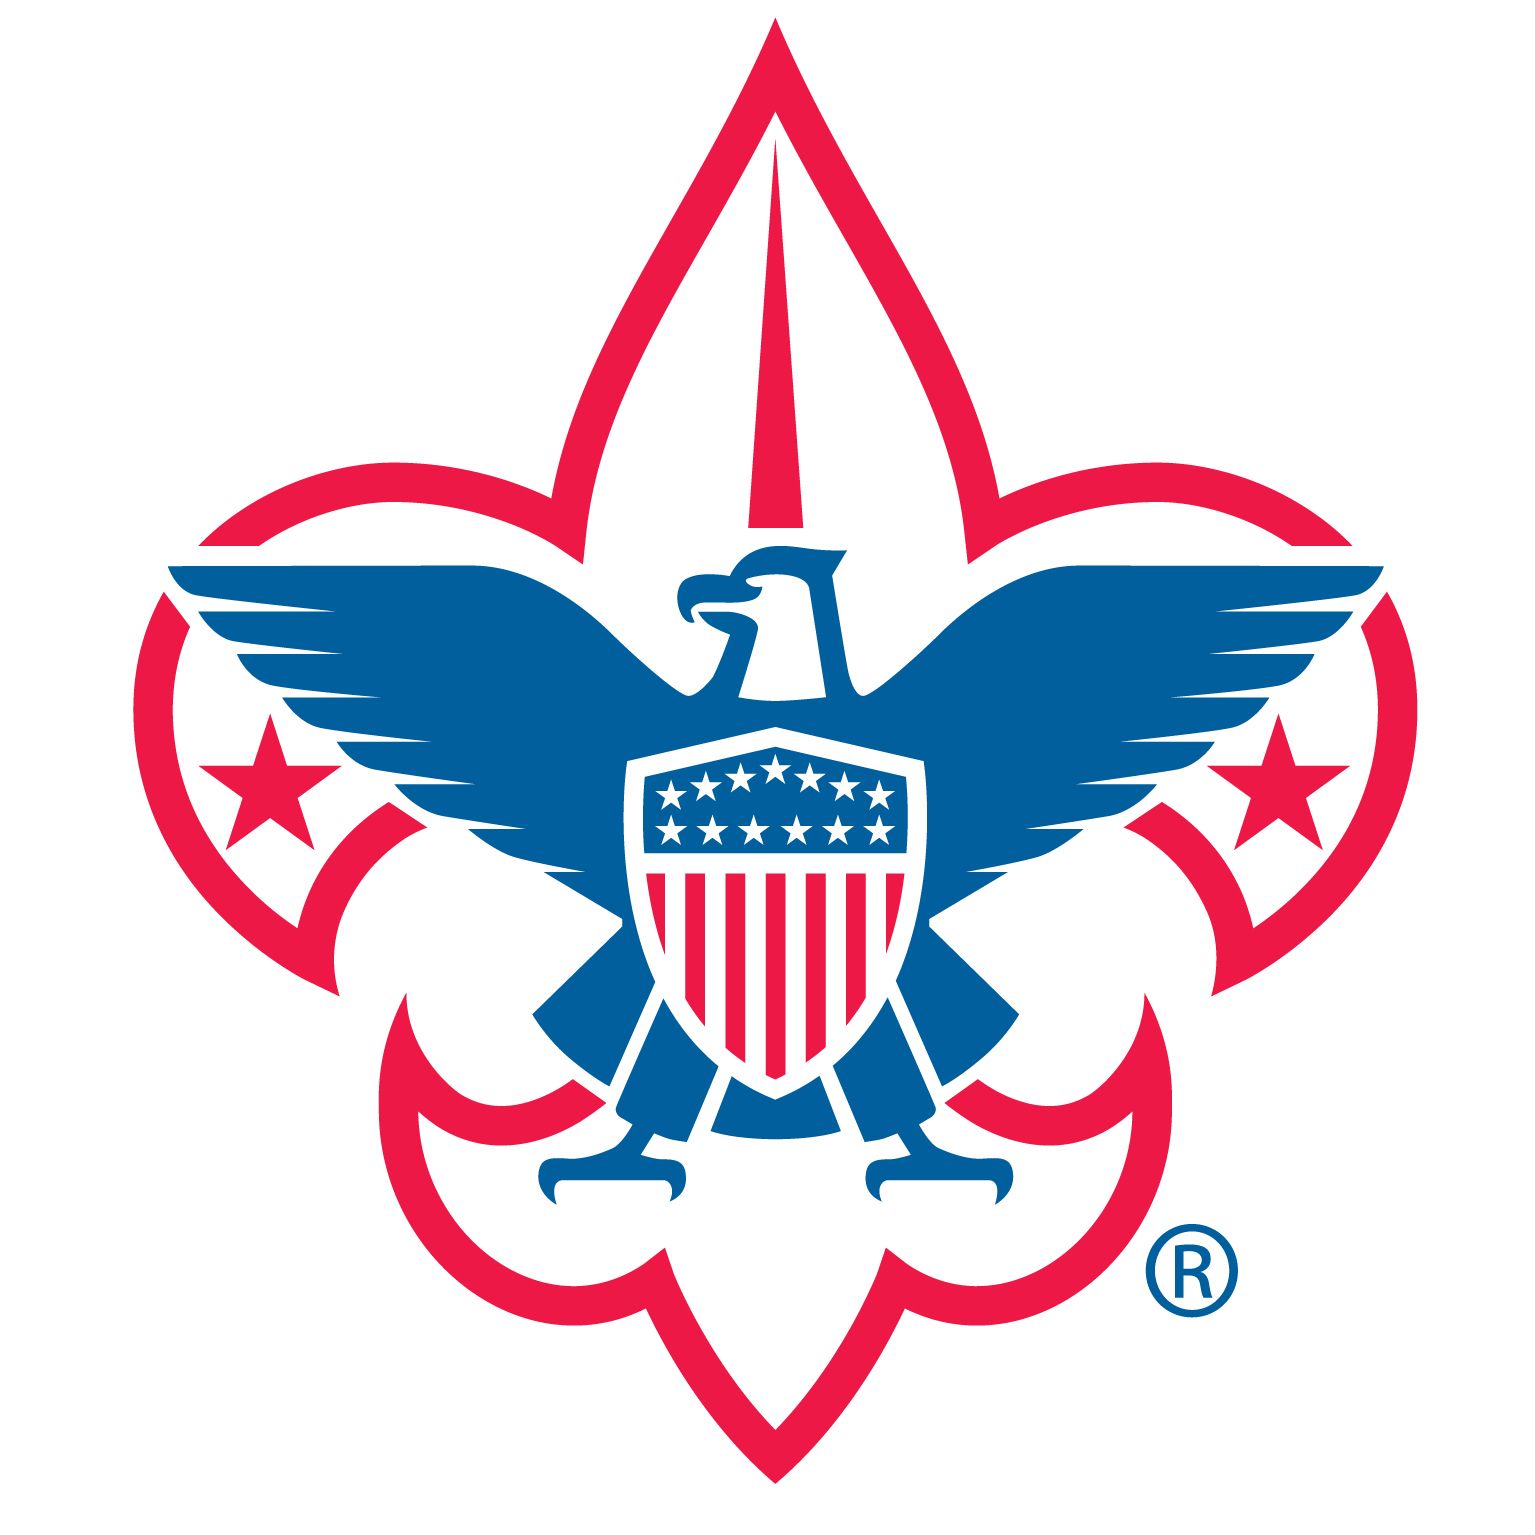 Turning Girls Into Boy Scouts?